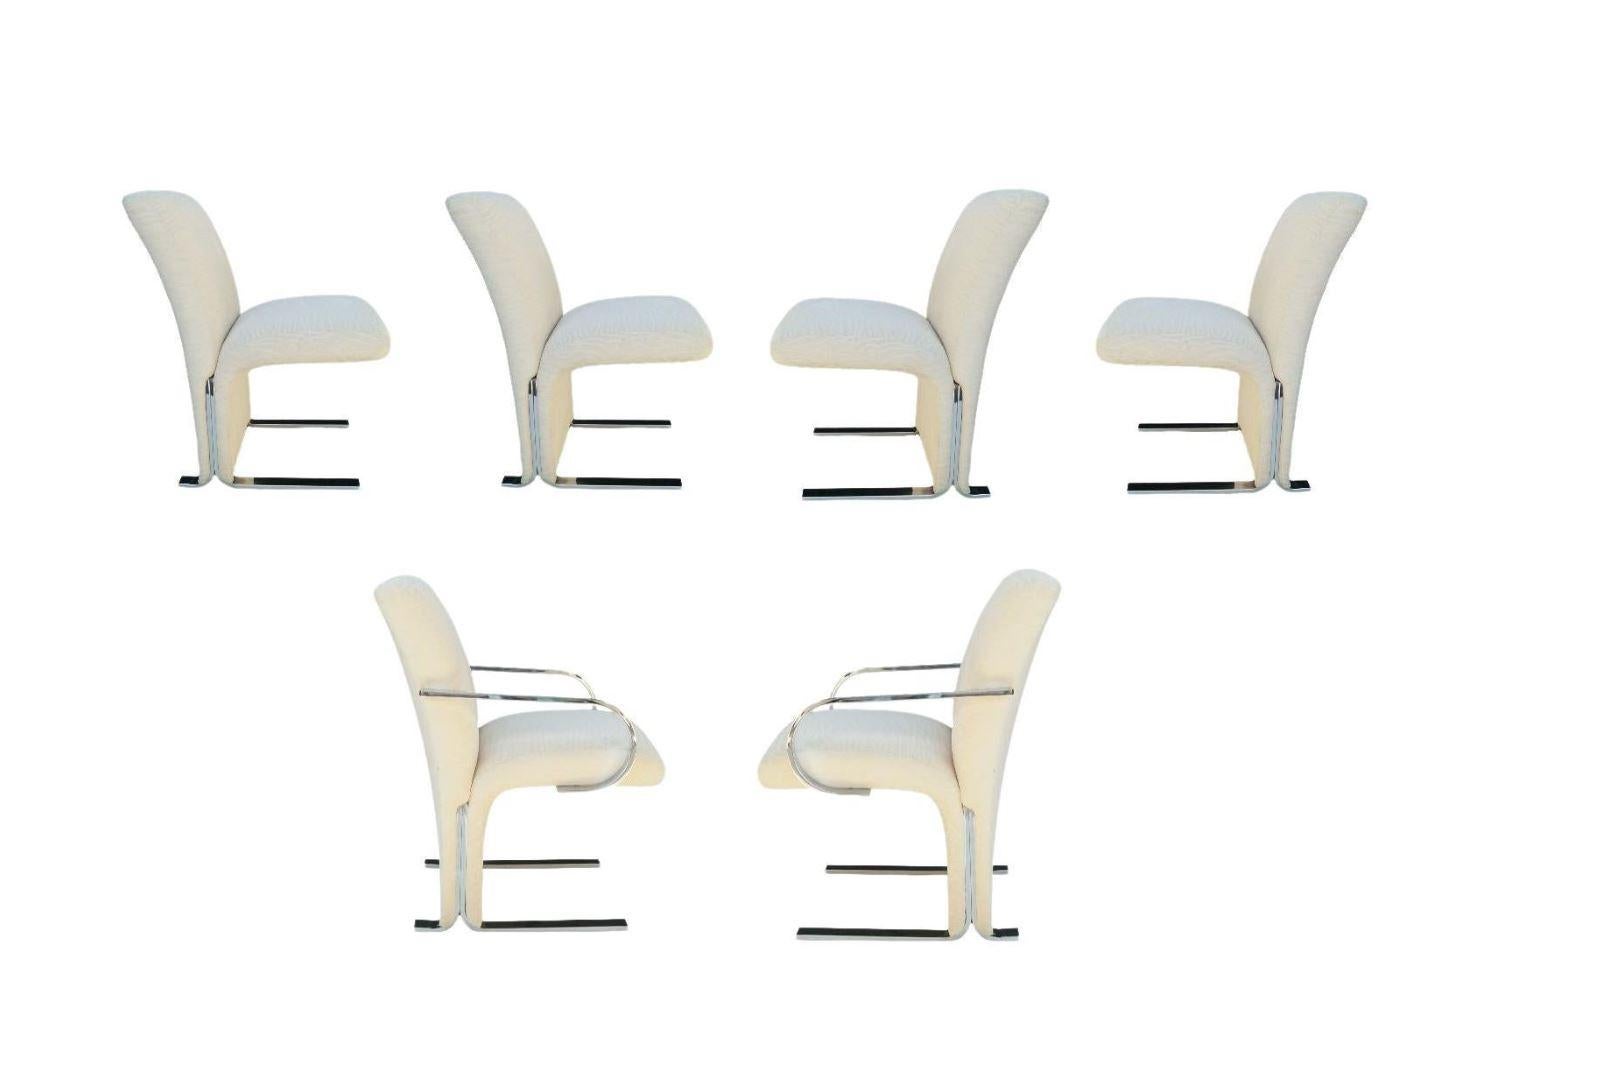 The size shown is for the 4 side chairs. The 2 arm head chairs measure 33.50